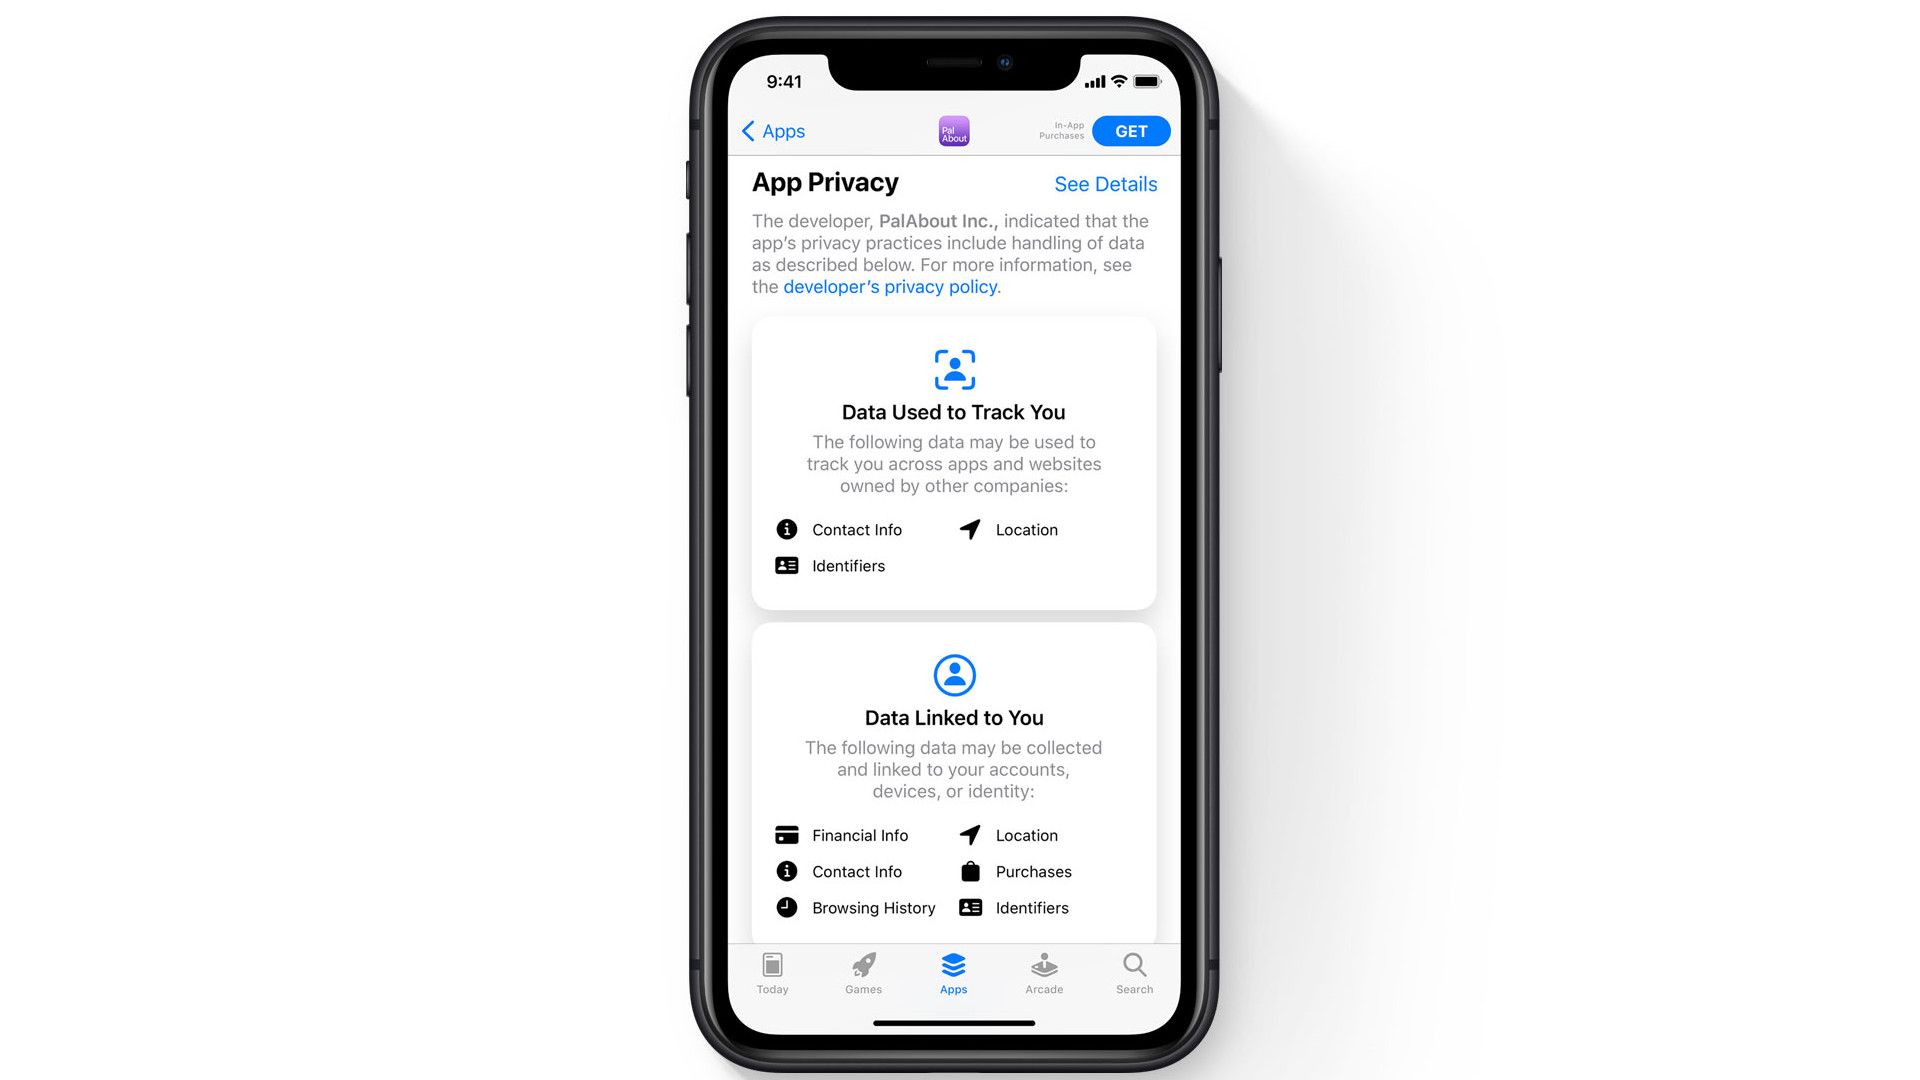 Apple to release iOS 14 tomorrow, but without the consent manager